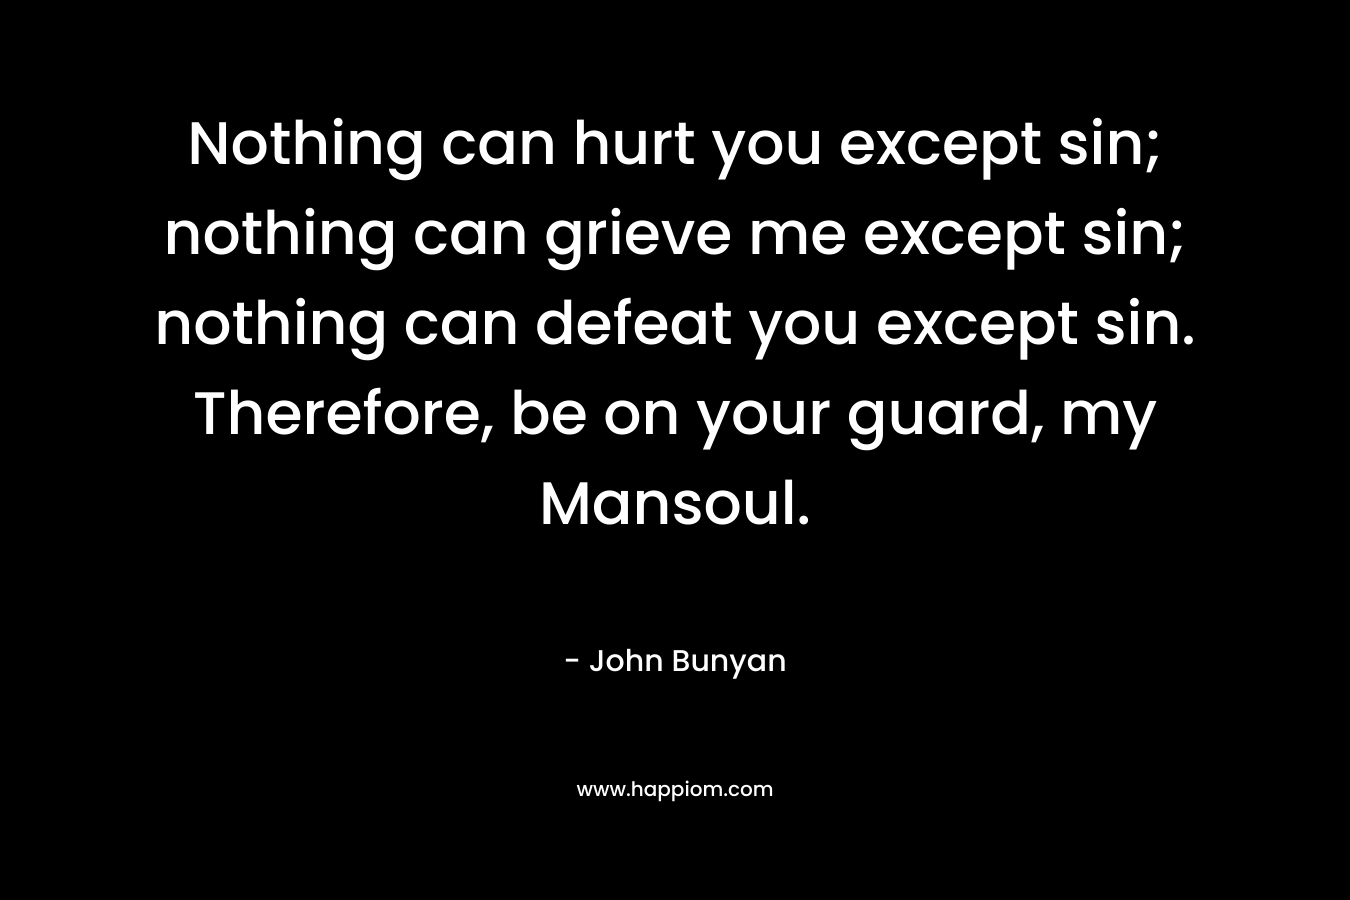 Nothing can hurt you except sin; nothing can grieve me except sin; nothing can defeat you except sin. Therefore, be on your guard, my Mansoul.